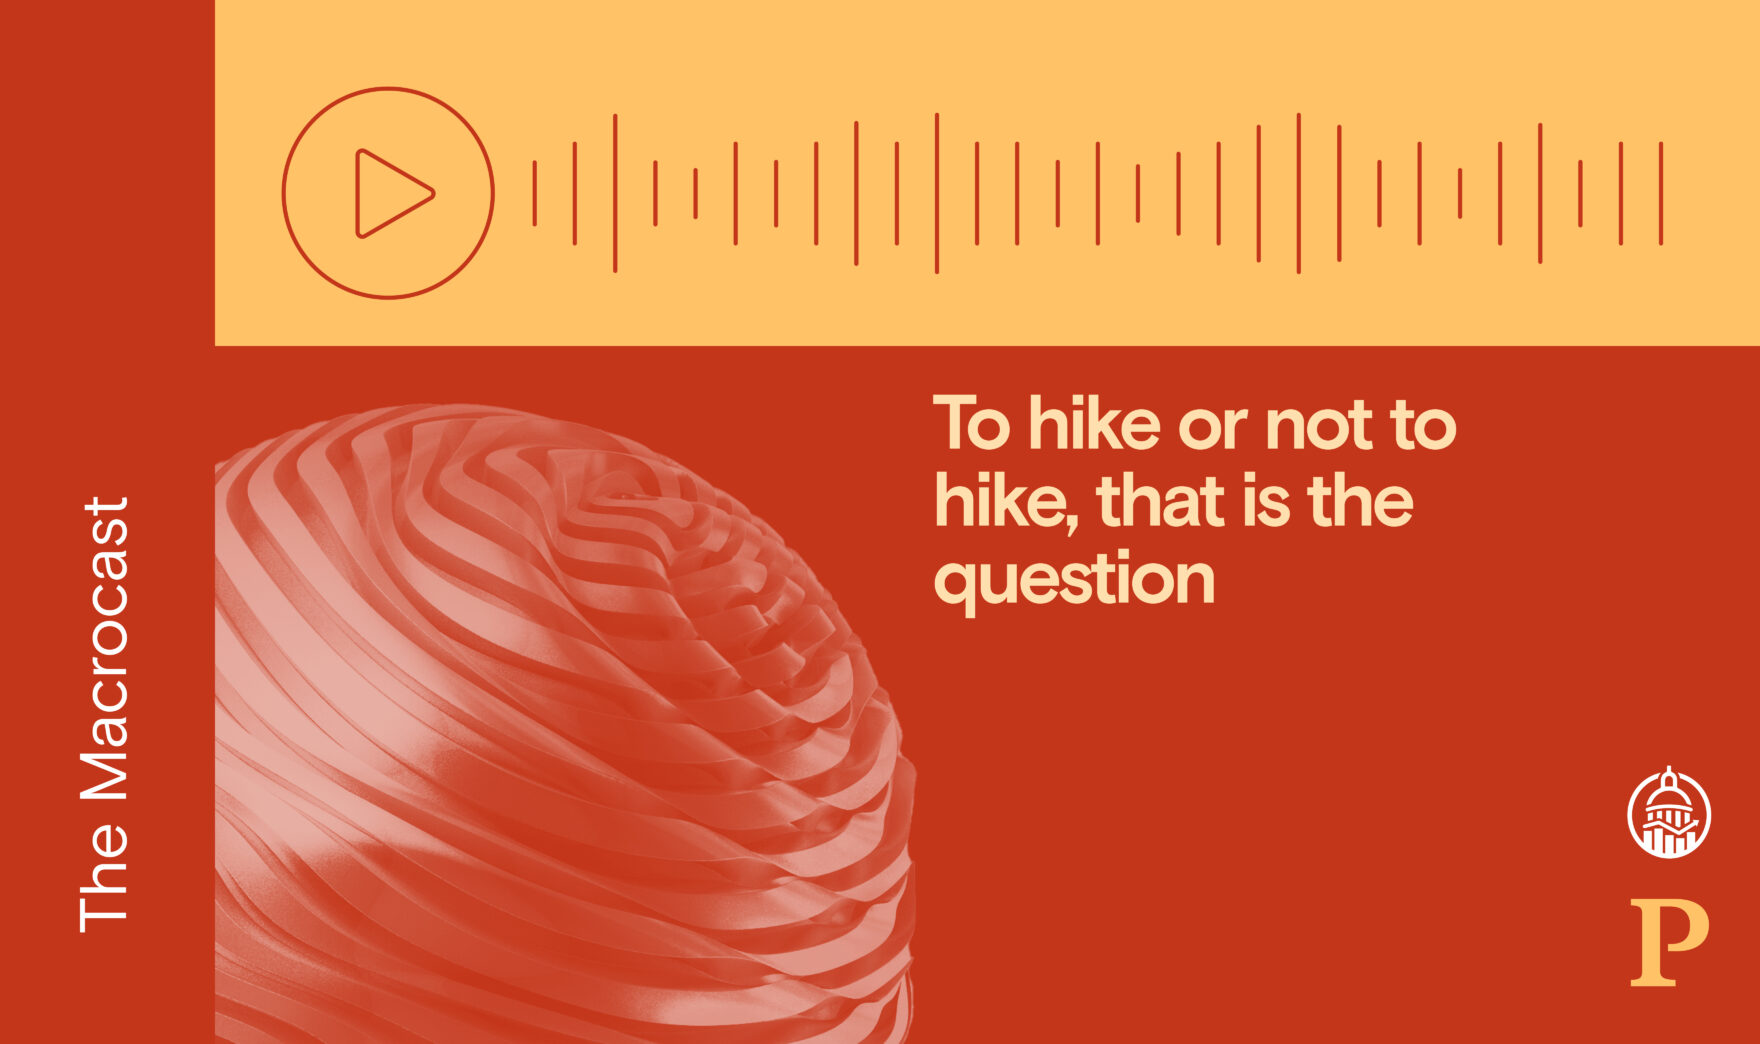 Macrocast: To hike or not to hike, that is the question